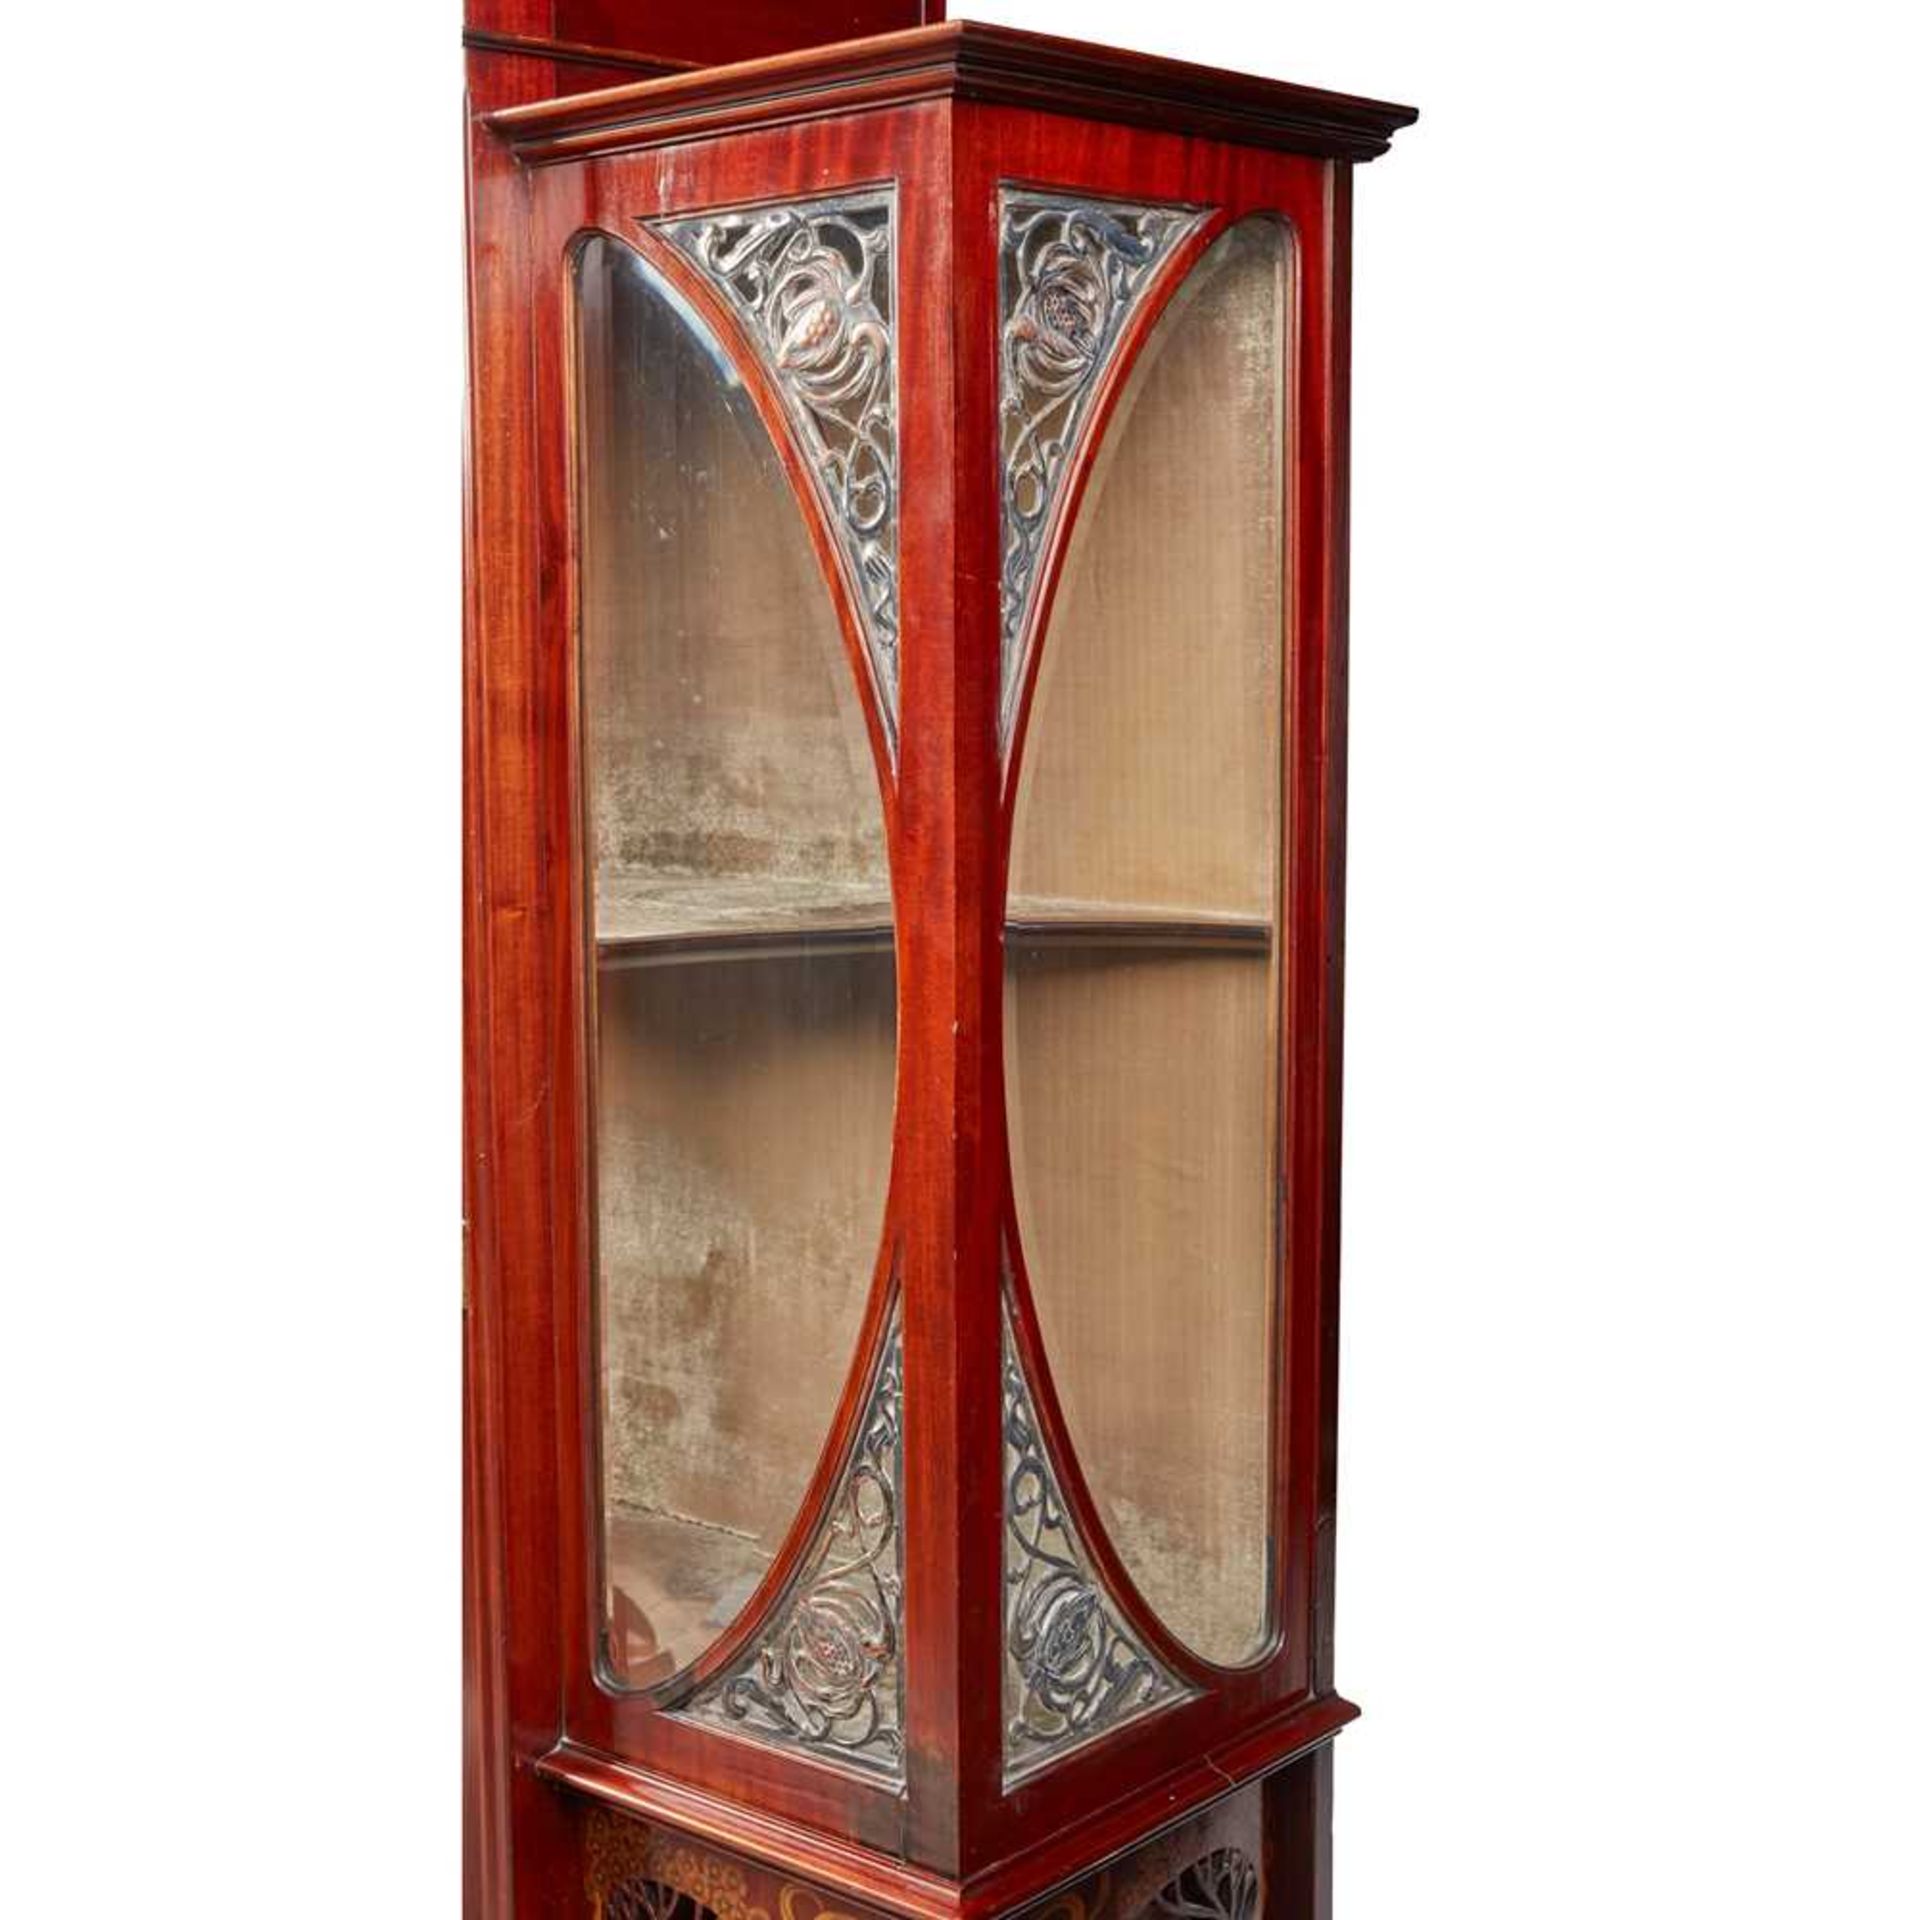 CHRISTOPHER PRATT AND SONS, BRADFORD (ATTRIBUTED TO) DISPLAY CABINET, CIRCA 1910 - Image 2 of 5